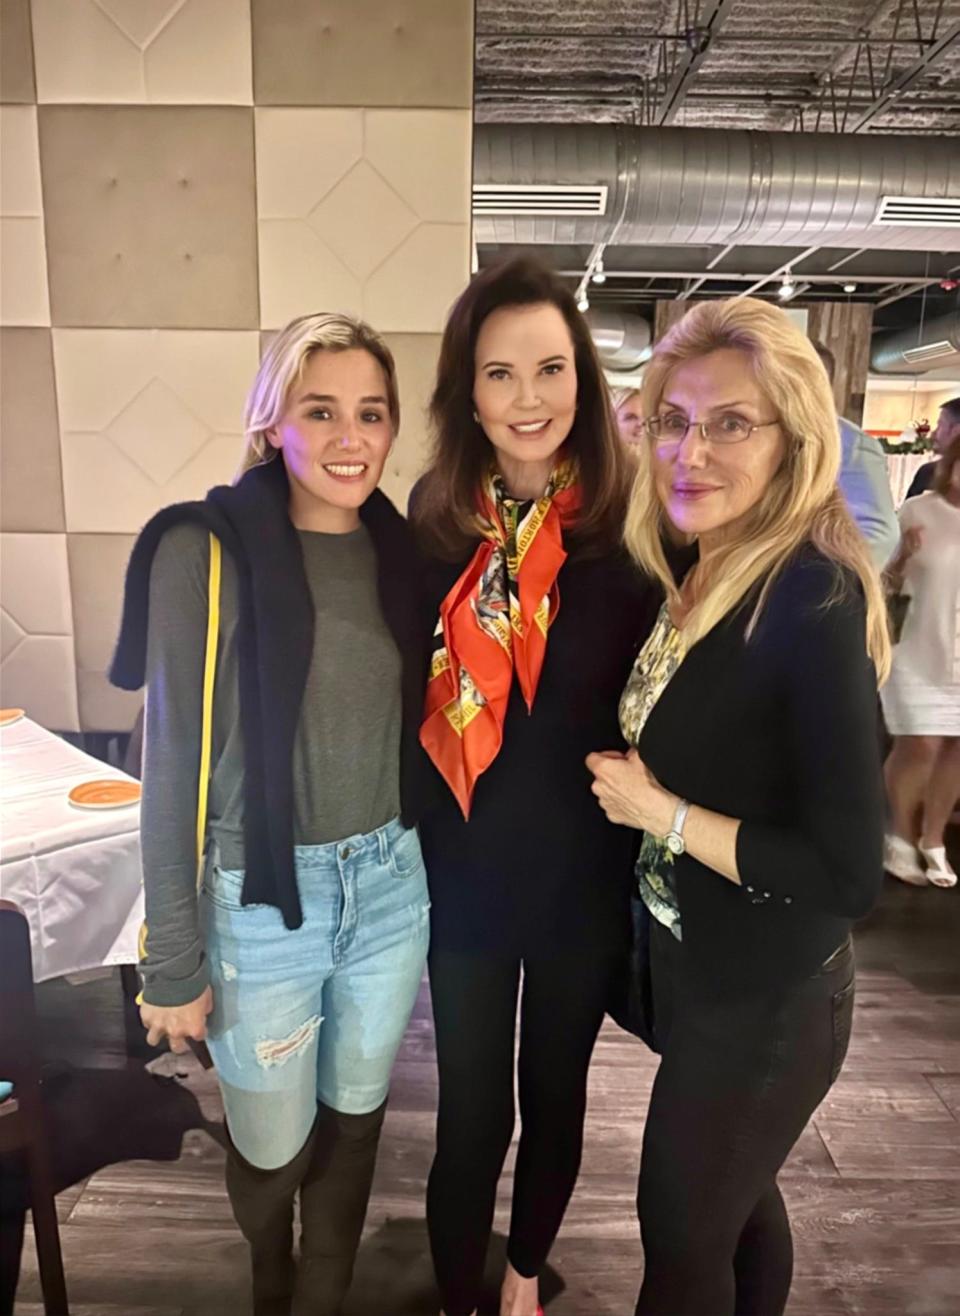 A serendipitous coincidence: Real estate brokers to the stars Jenny and Dolly Lenz bumped into their client and good friend Patricia Altschul at Dorona.